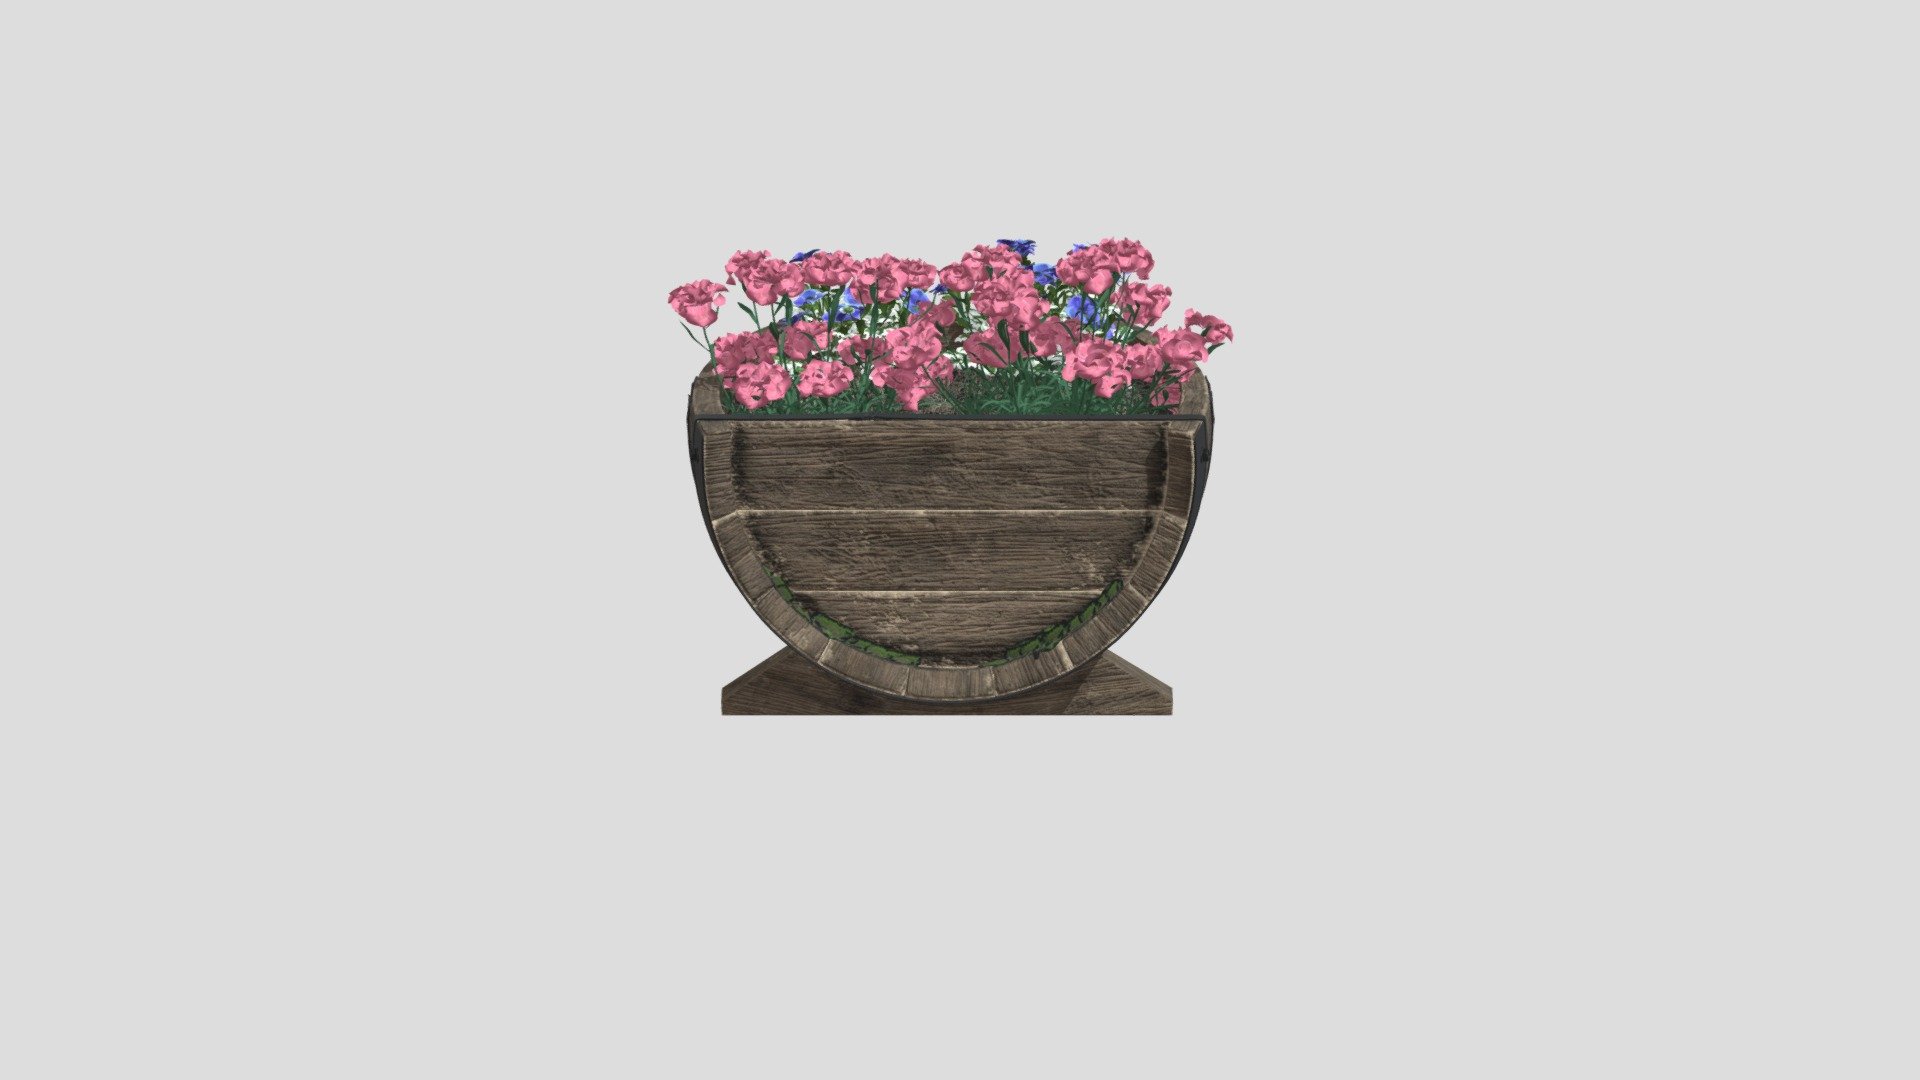 Professional, highly detailed 3d model of garden props. Textures and materials are included. This model is ready to use in your visualizations 3d model